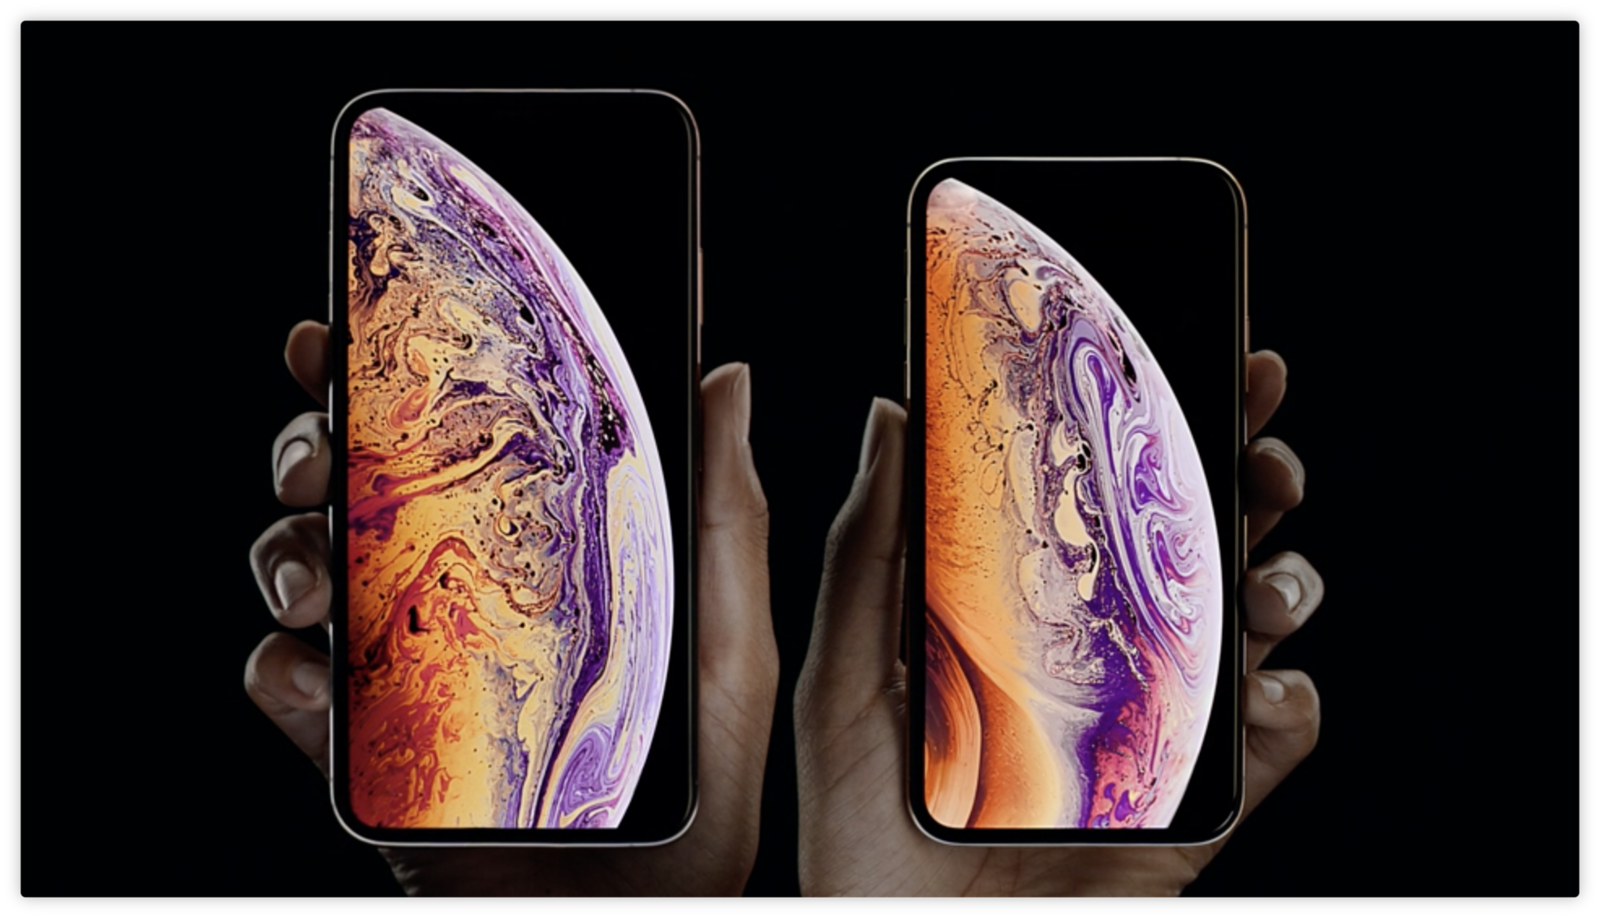 iPhone XS, iPhone XS Max, iPhone XR, specifications, features and pricing